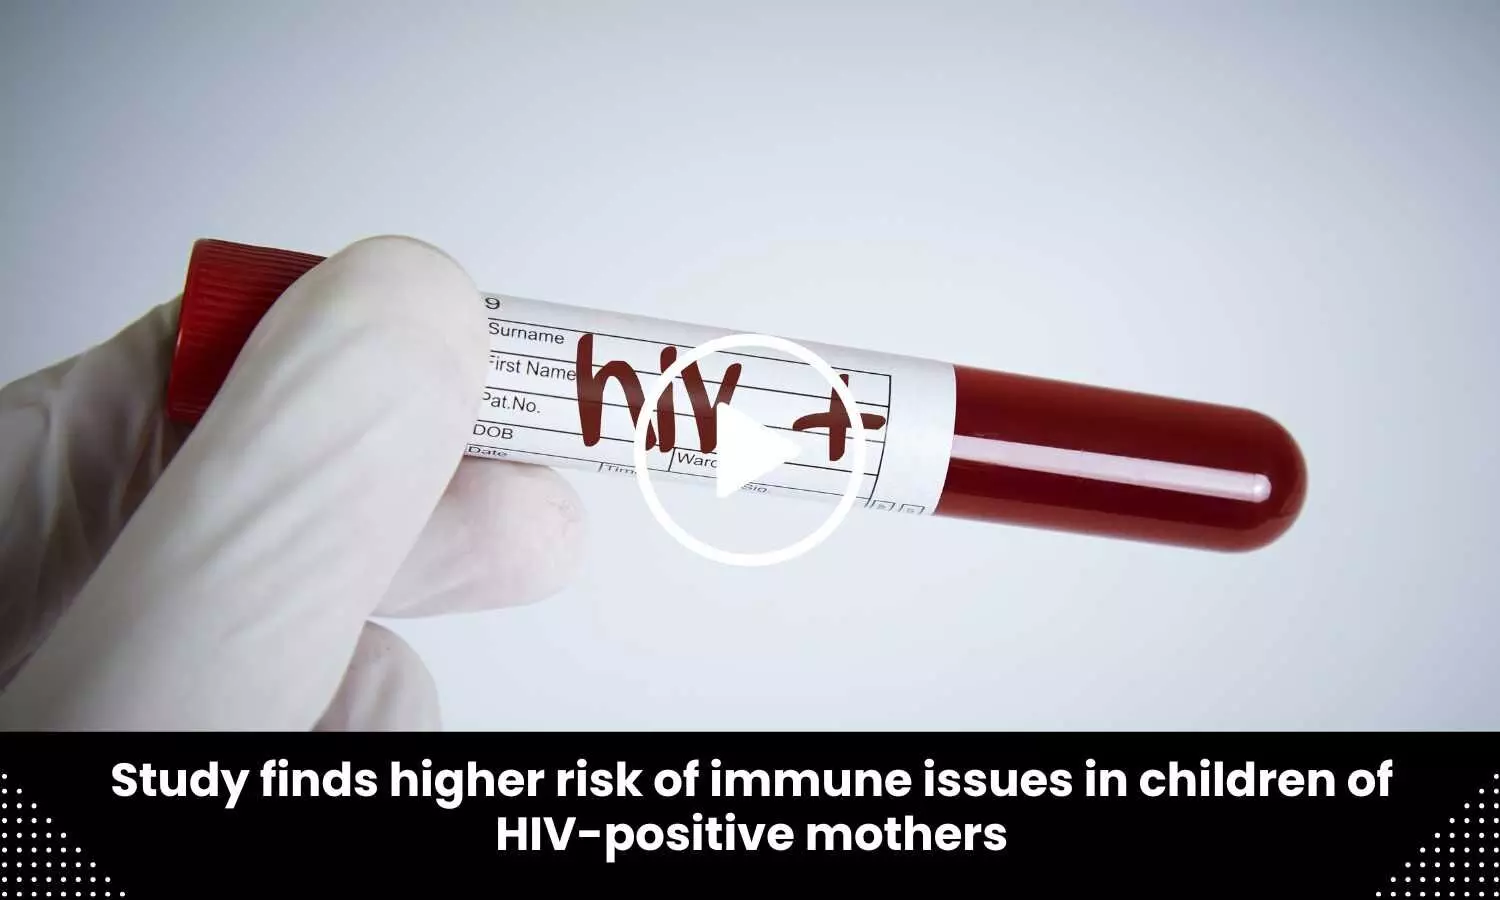 Study finds higher risk of immune issues in children of HIV-positive mothers